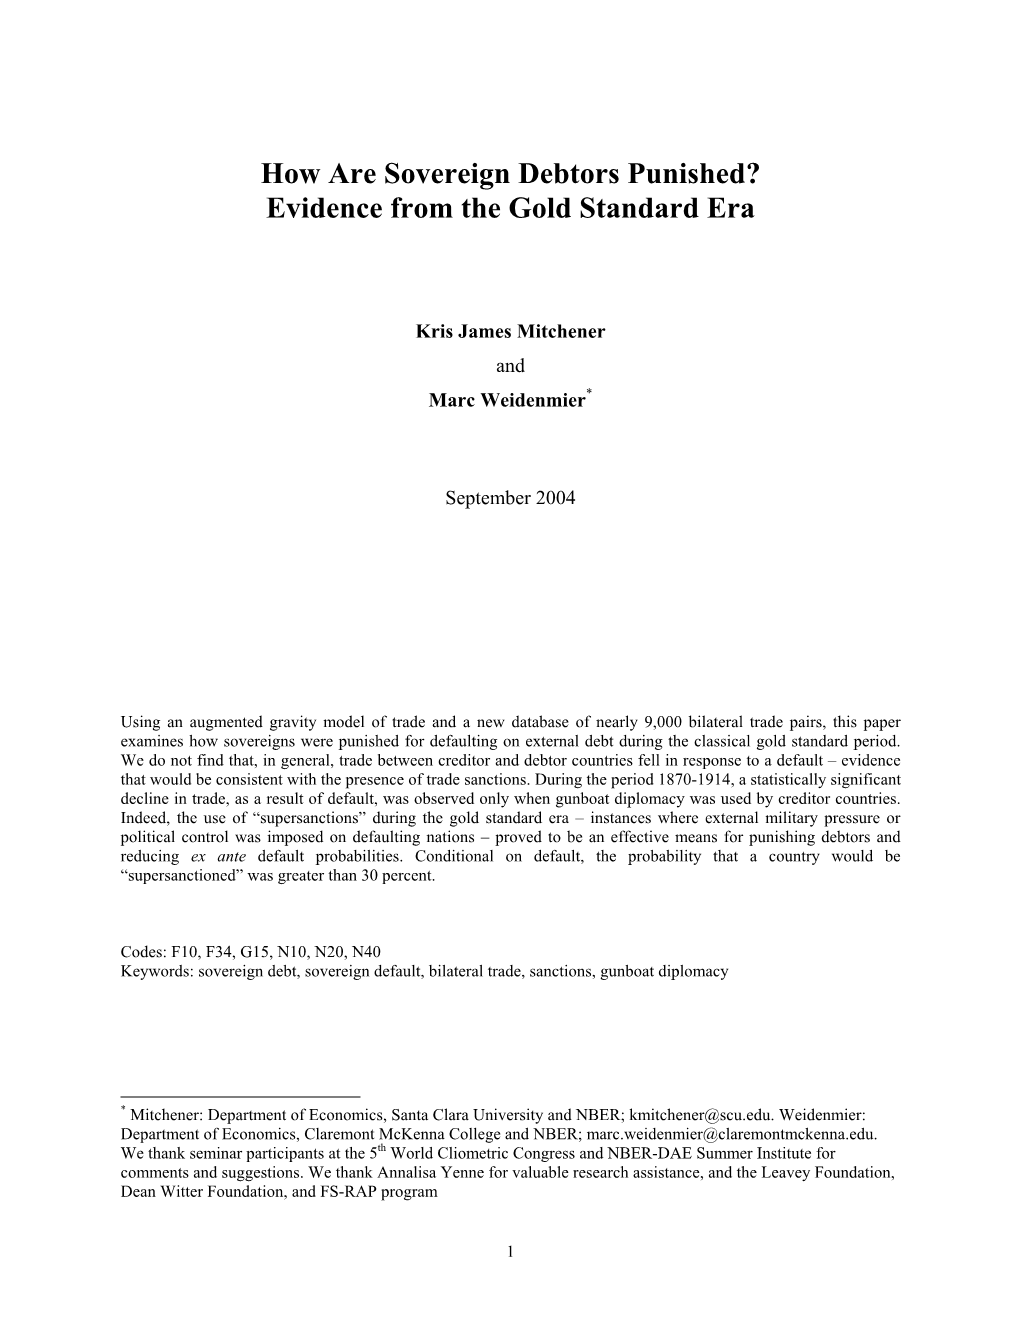 How Are Sovereign Debtors Punished? Evidence from the Gold Standard Era